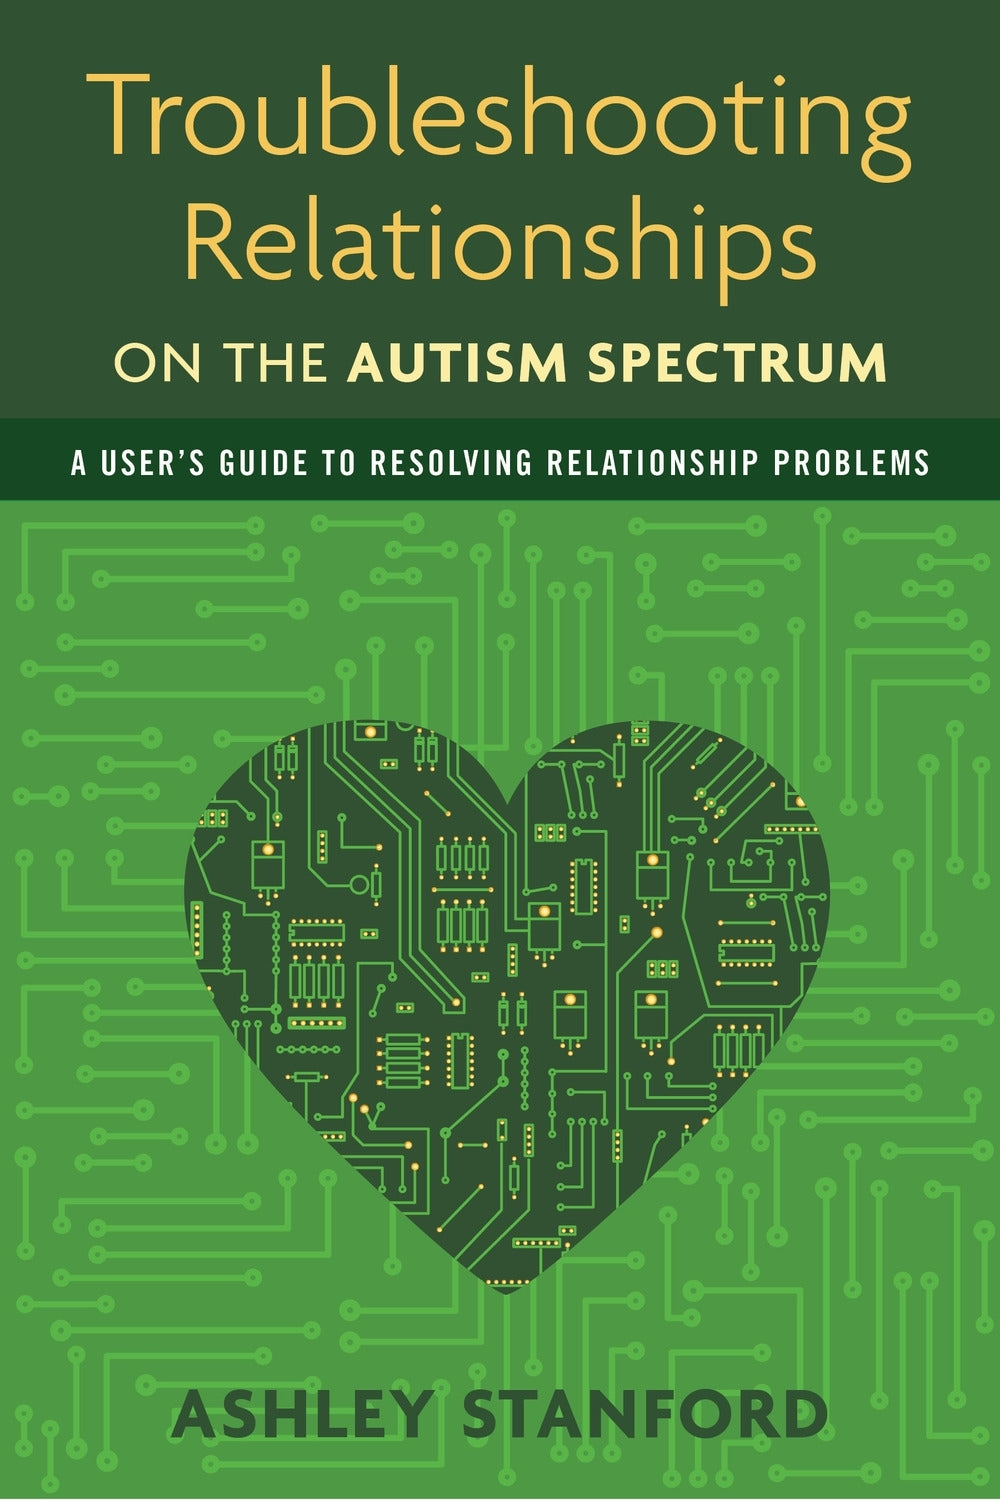 Troubleshooting Relationships on the Autism Spectrum by Ashley Stanford